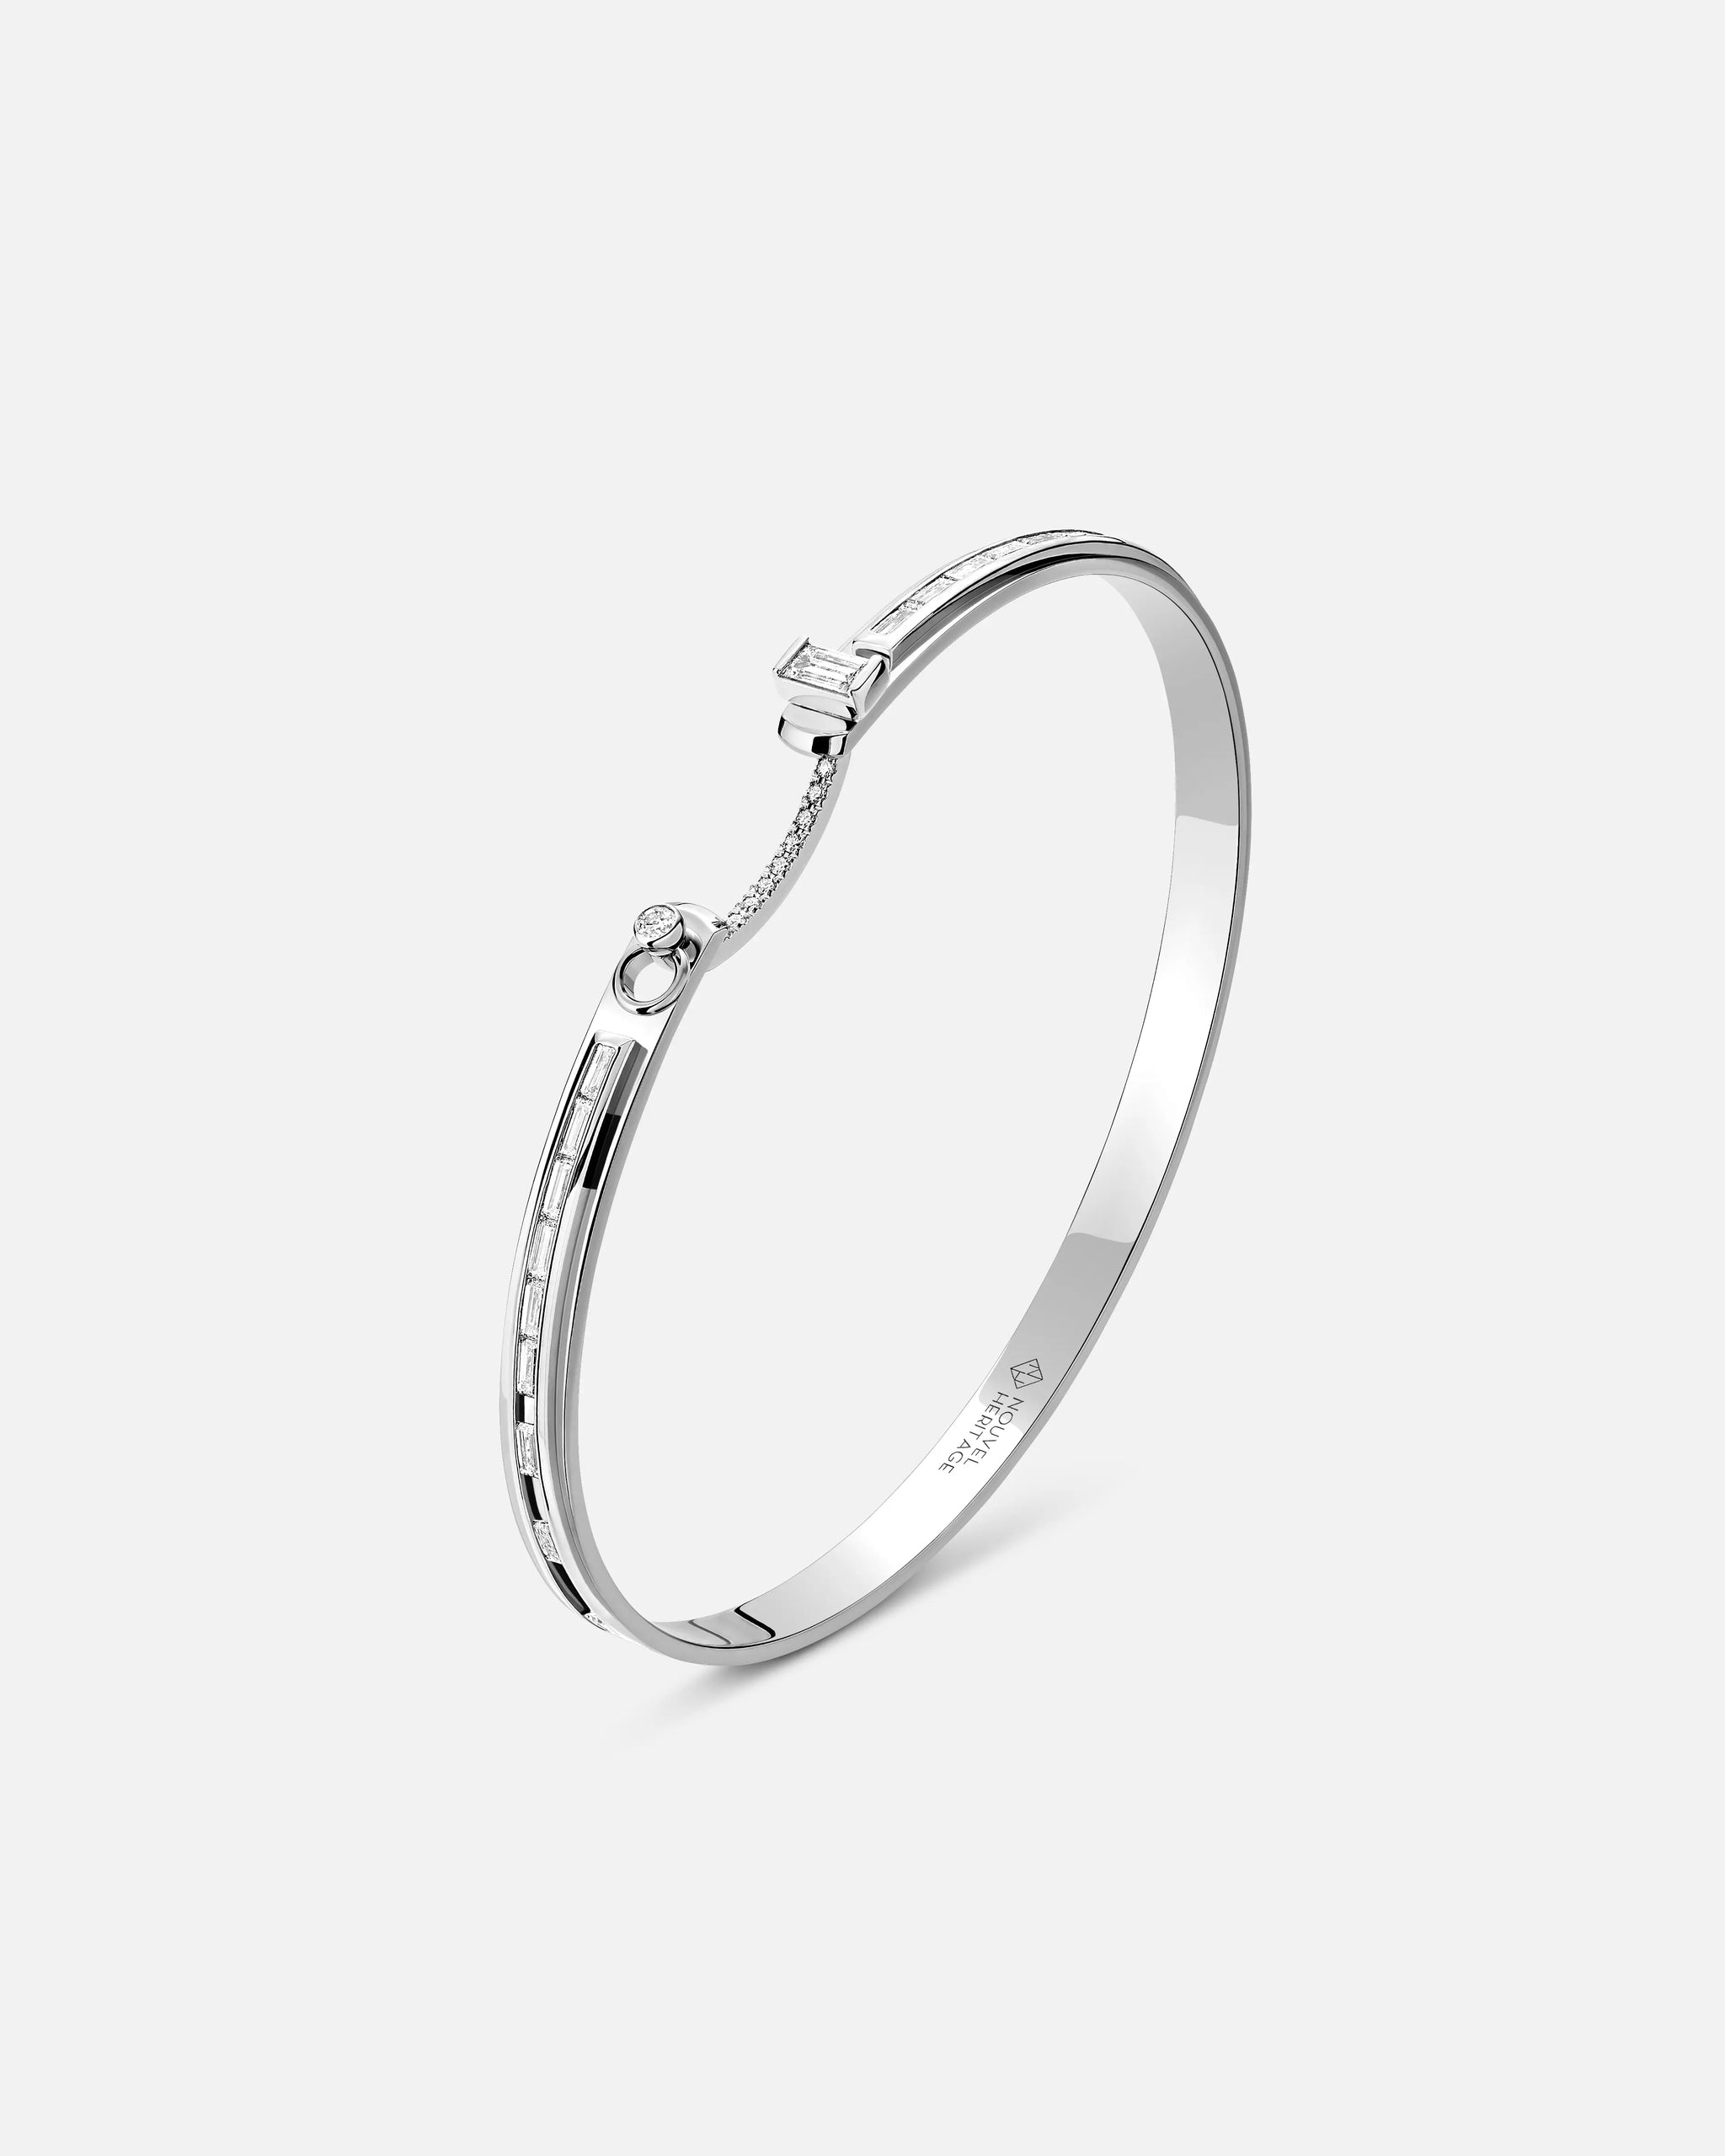 My Best Friend's Wedding Mood Bangle in White Gold - 1 - Nouvel Heritage